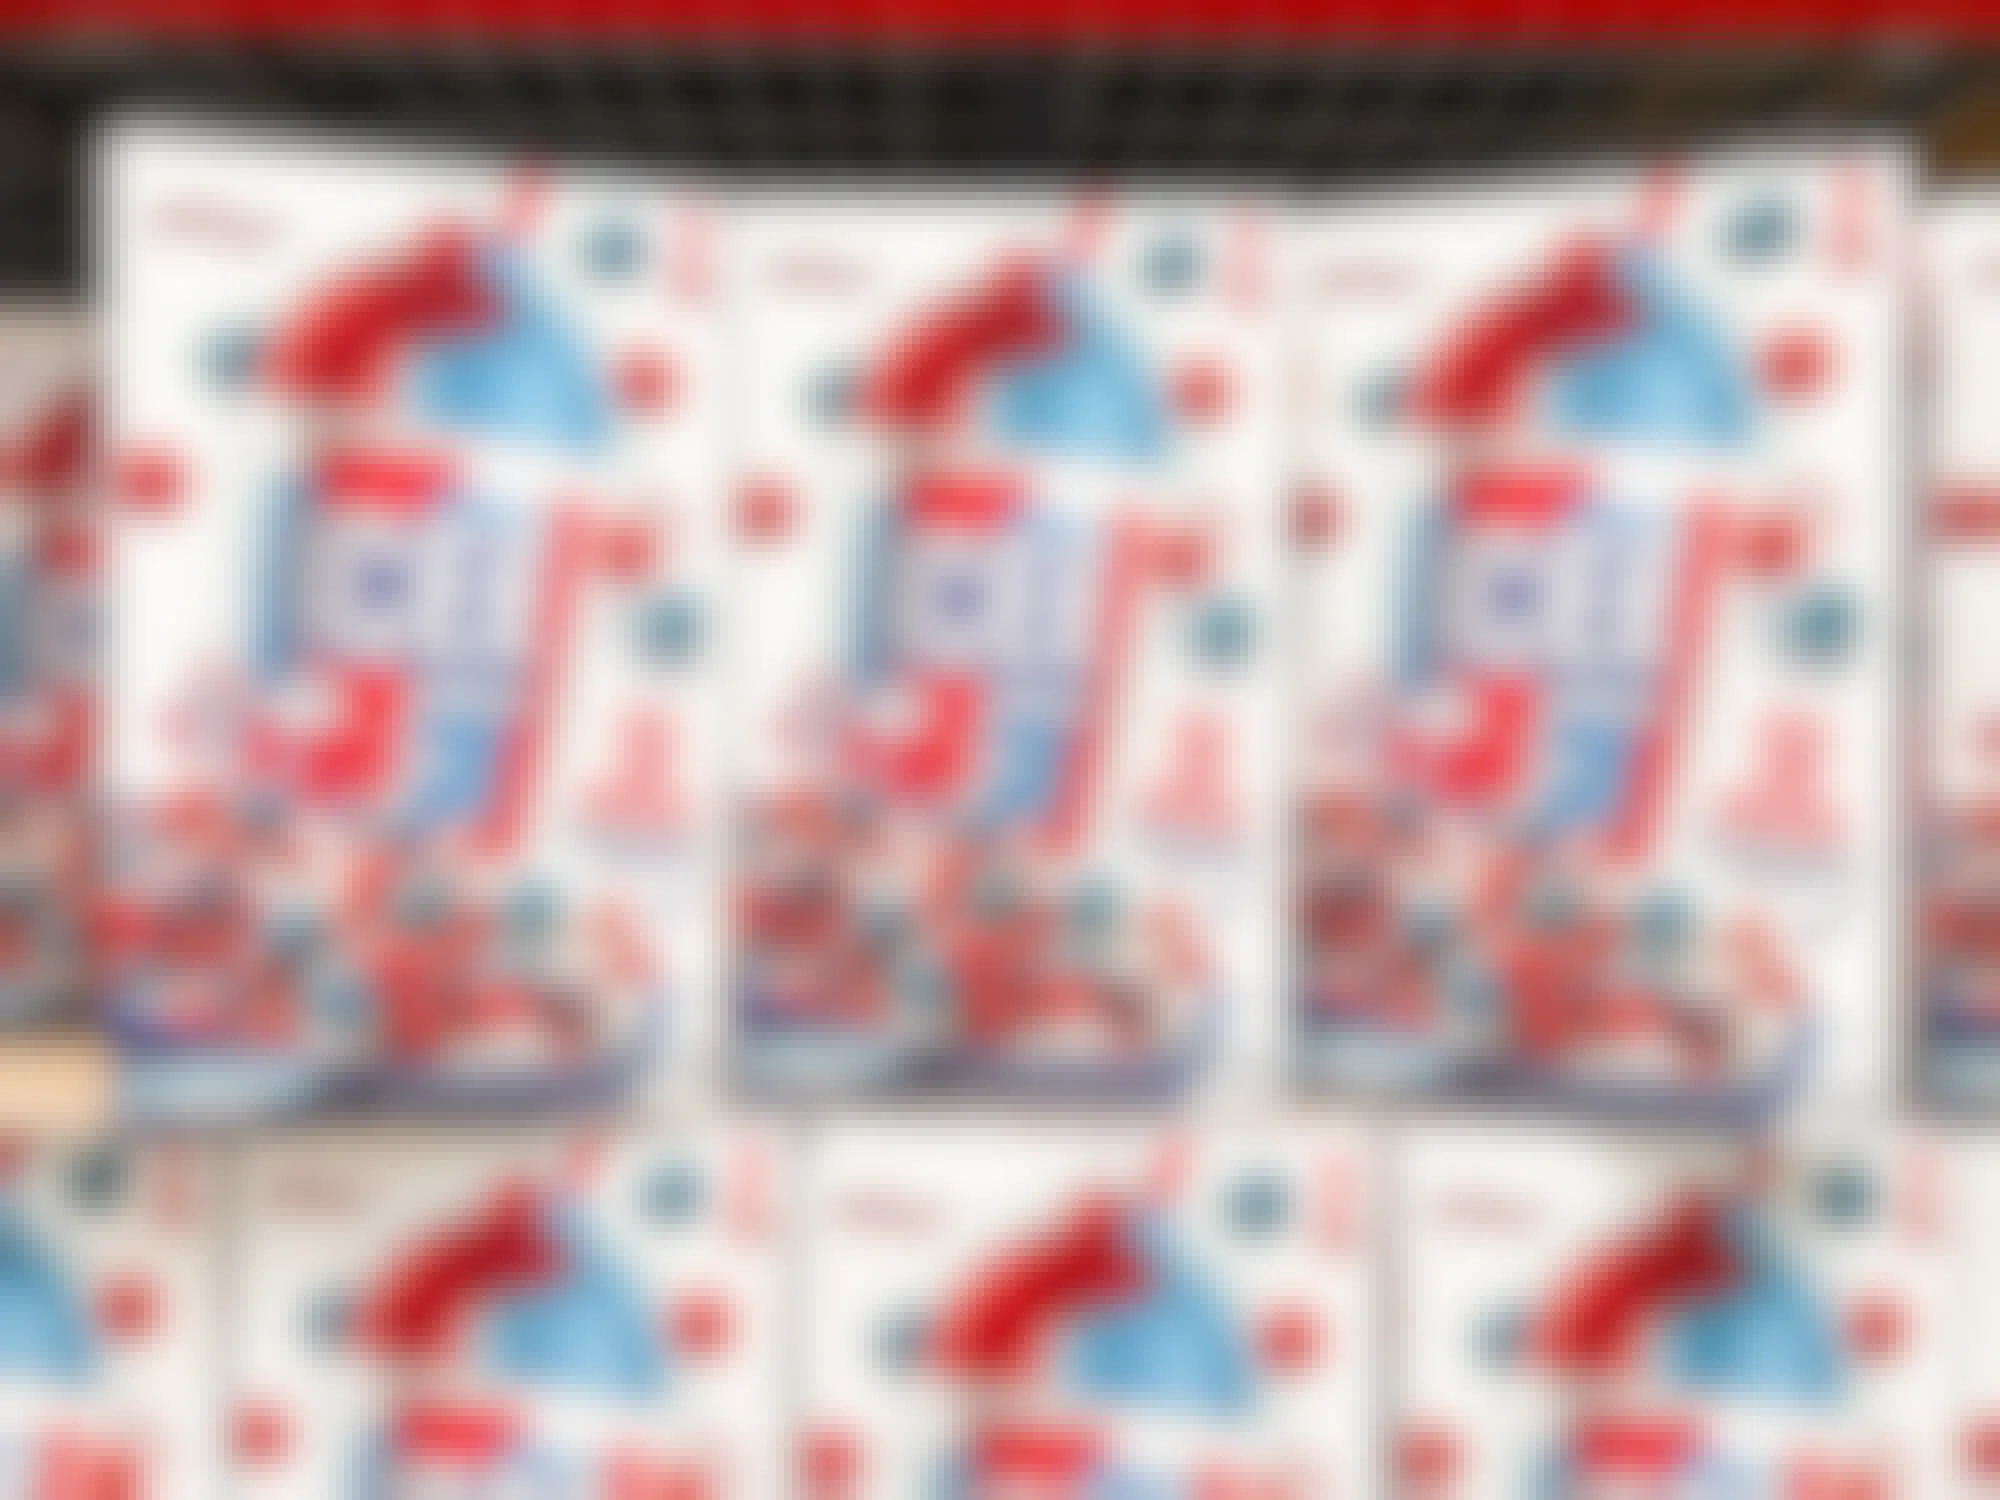 This New Kellogg's ICEE Cereal Cools Your Mouth as You Eat